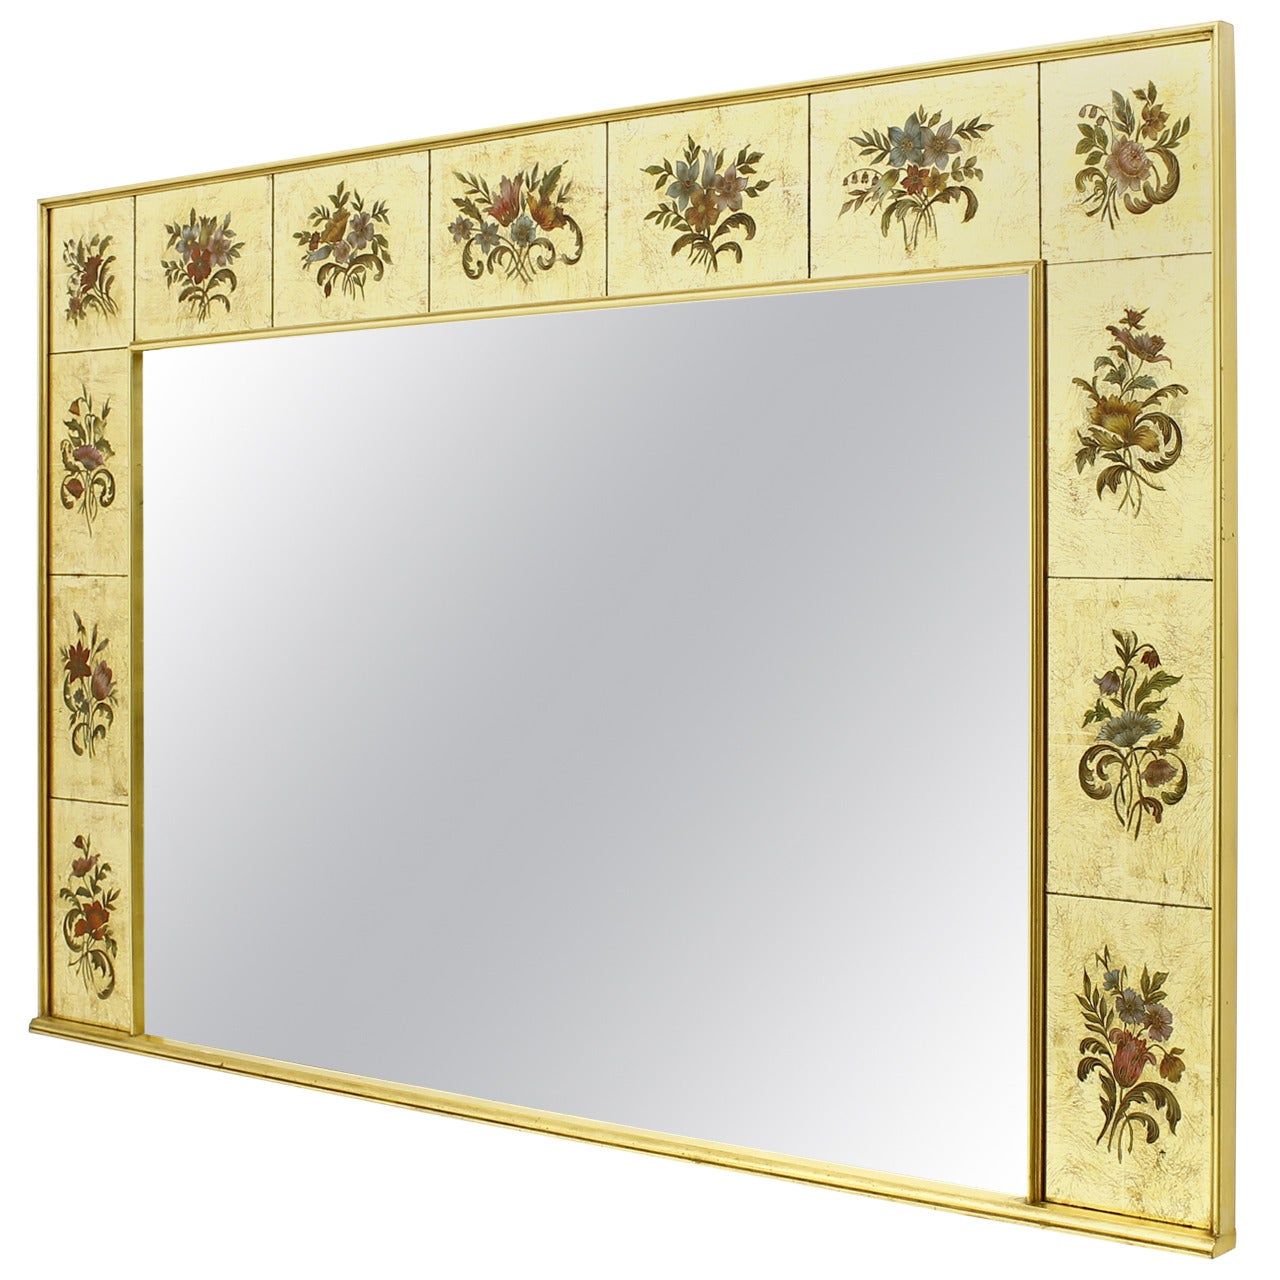 Decorative Large Mirror from France, circa 1980s signed